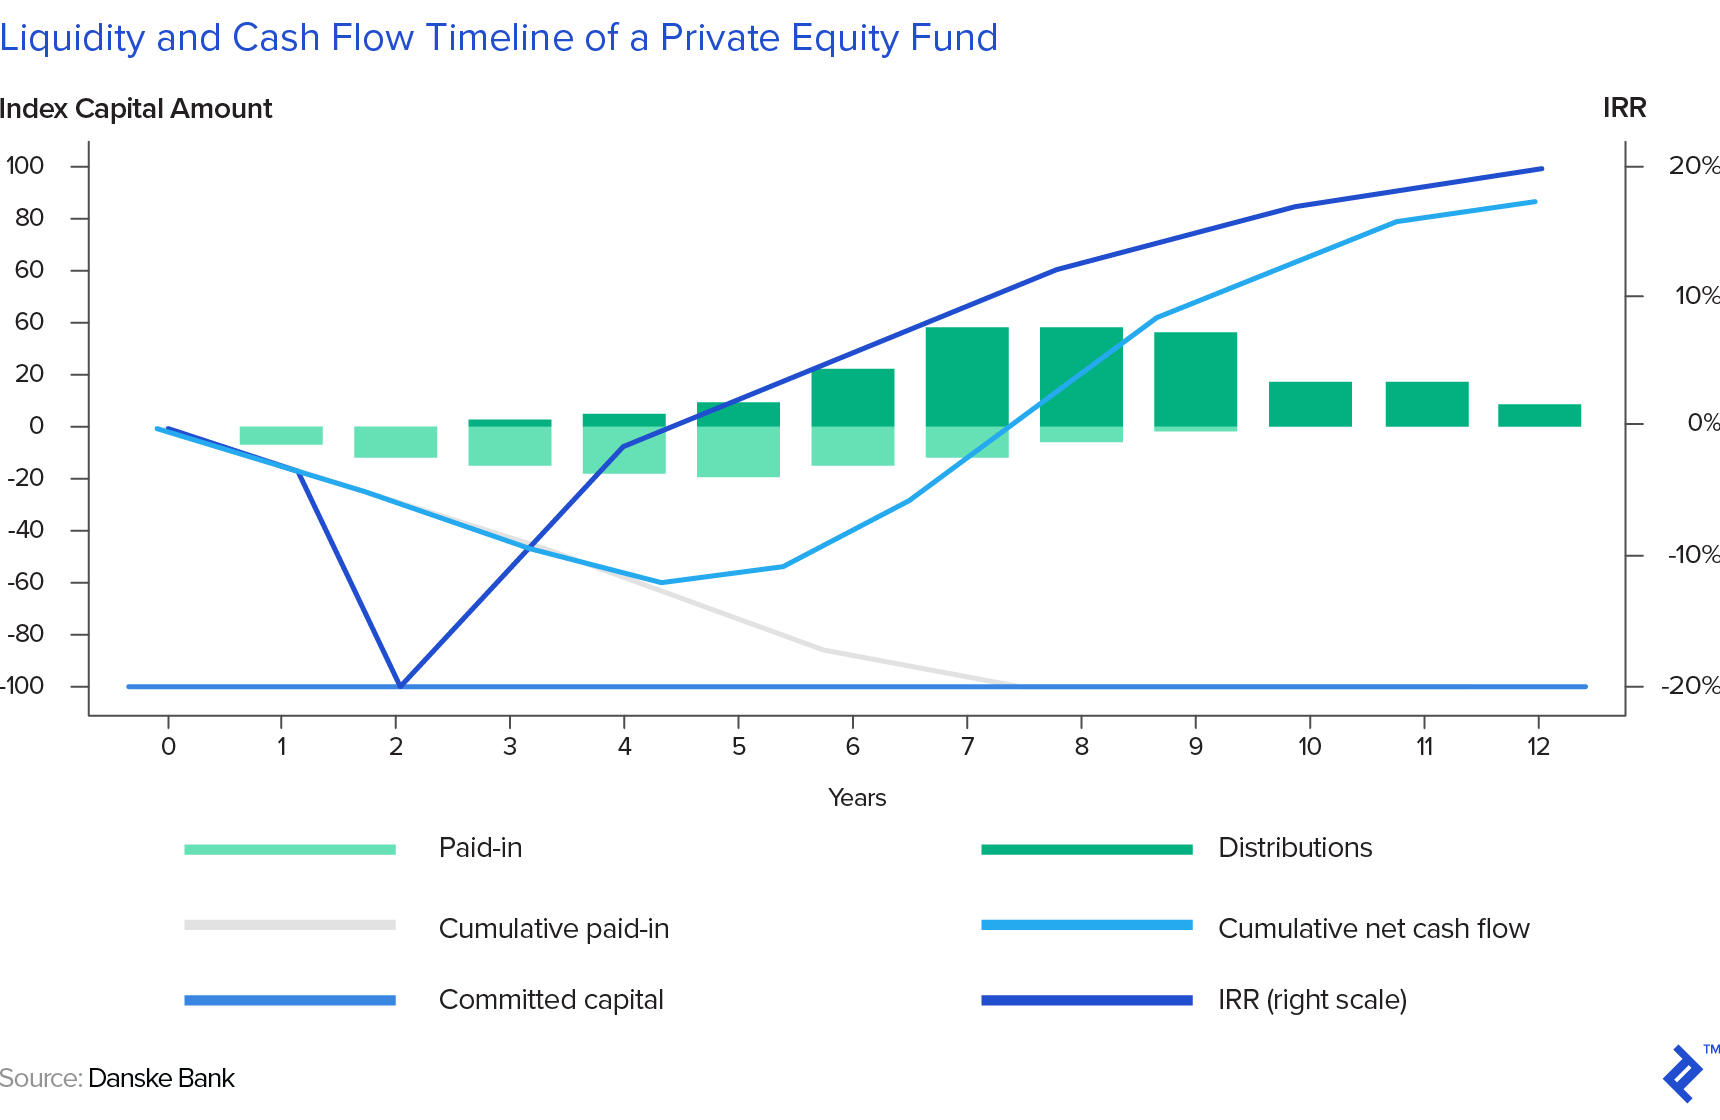 cash flow profile of a private equity fund